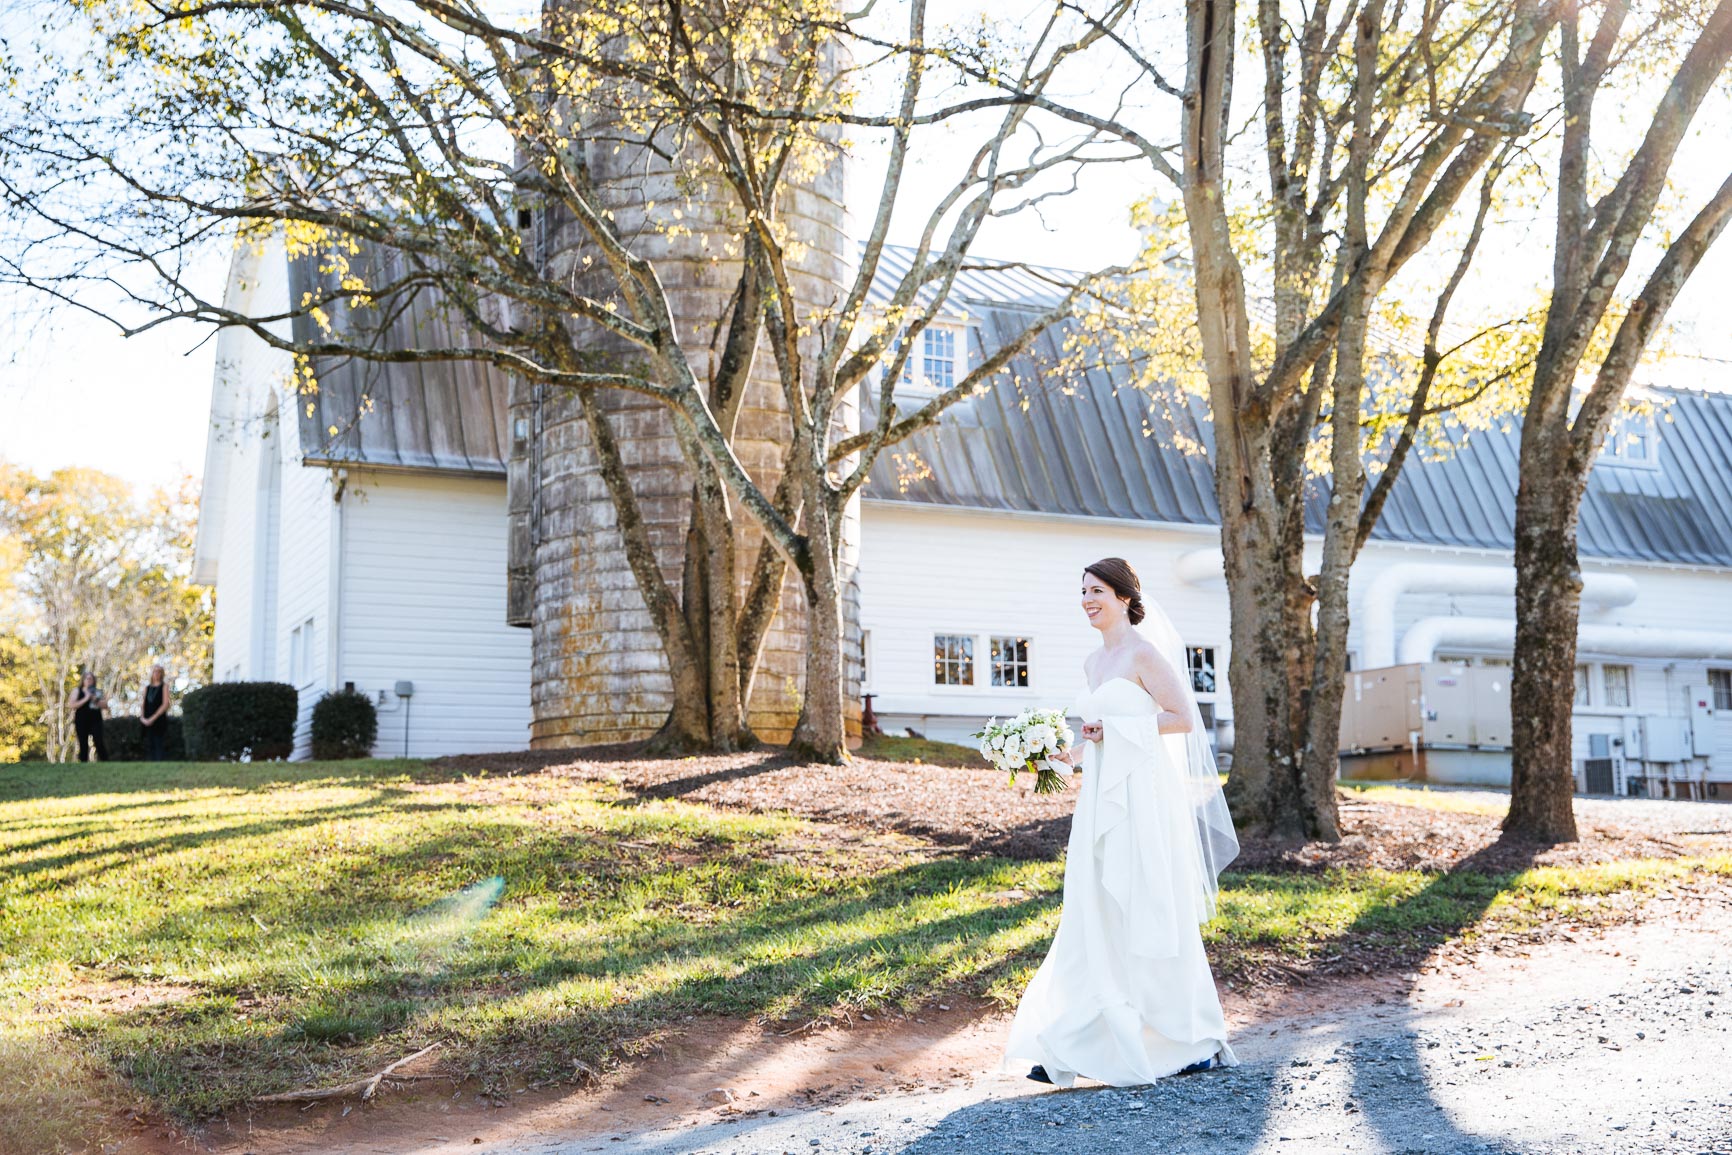 Wedding 1st look at The Dairy Barn in Fort Mill SC by Nhieu Tang photography | nhieutang.com